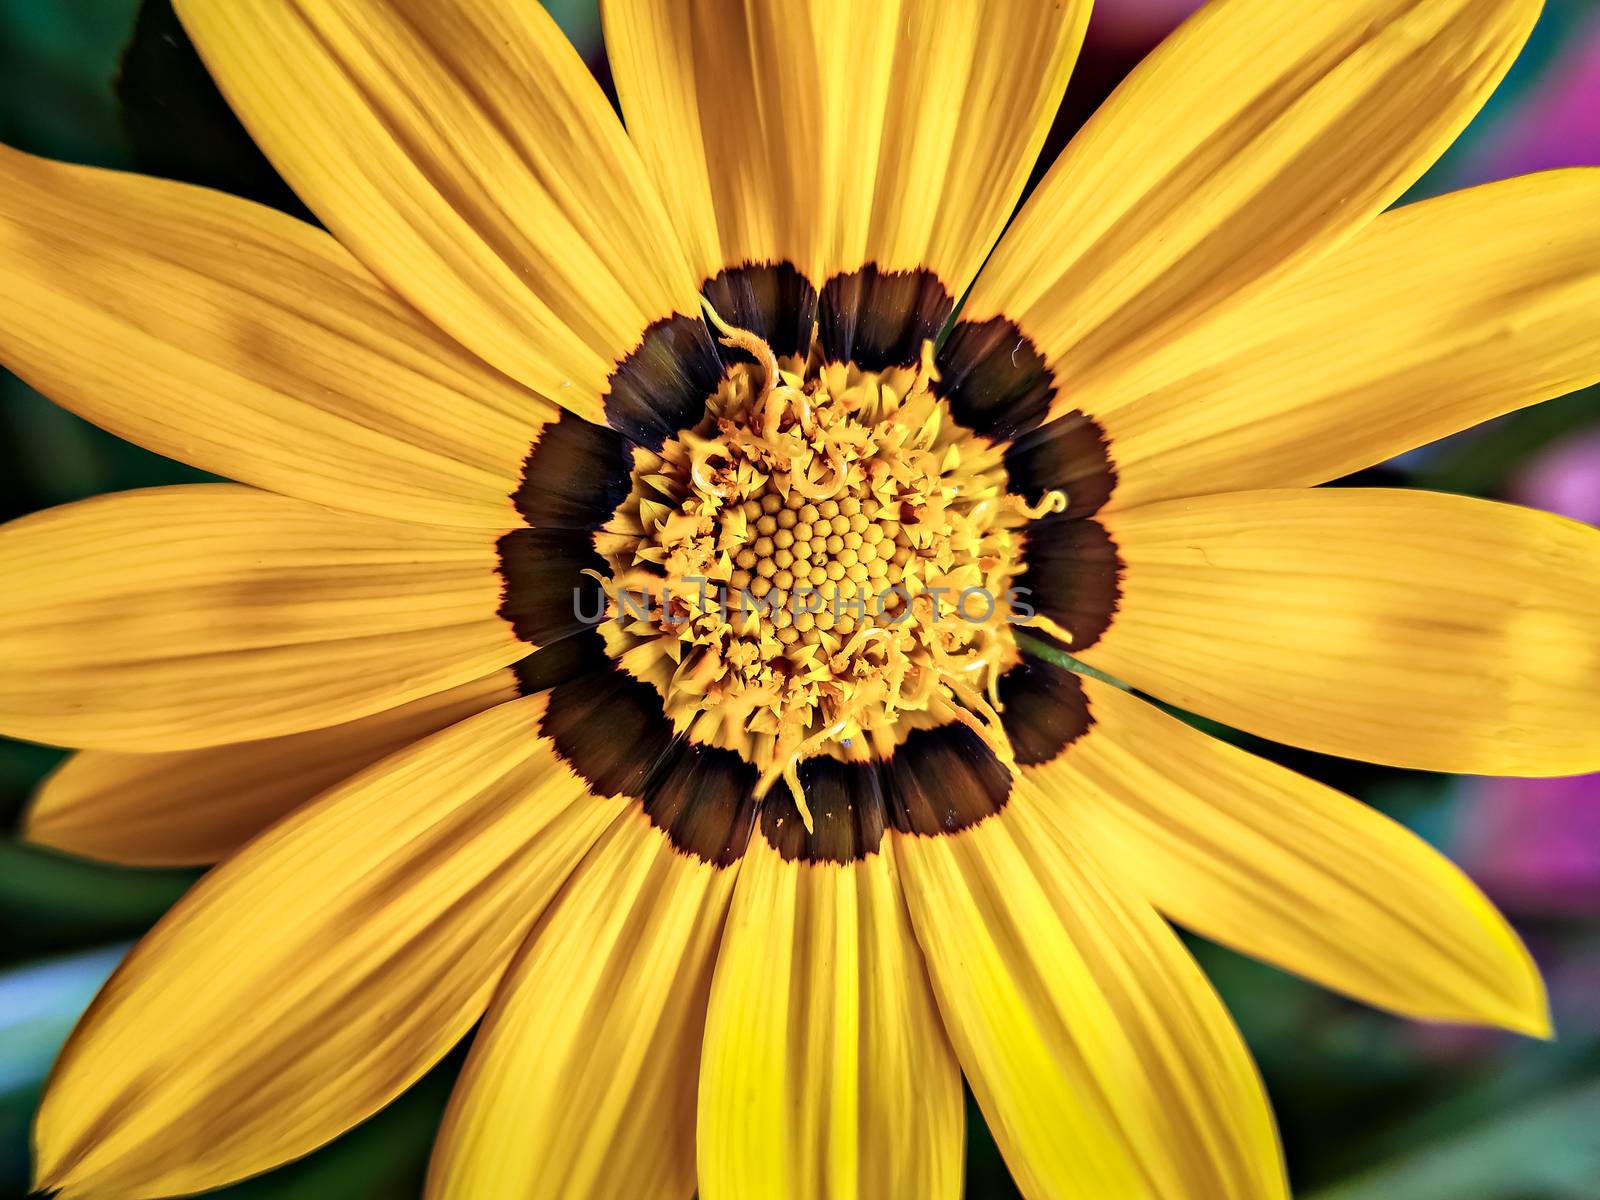 Isolated, close-up image of  yellow & brown petals  of Gazania flower with yellow center. by lalam